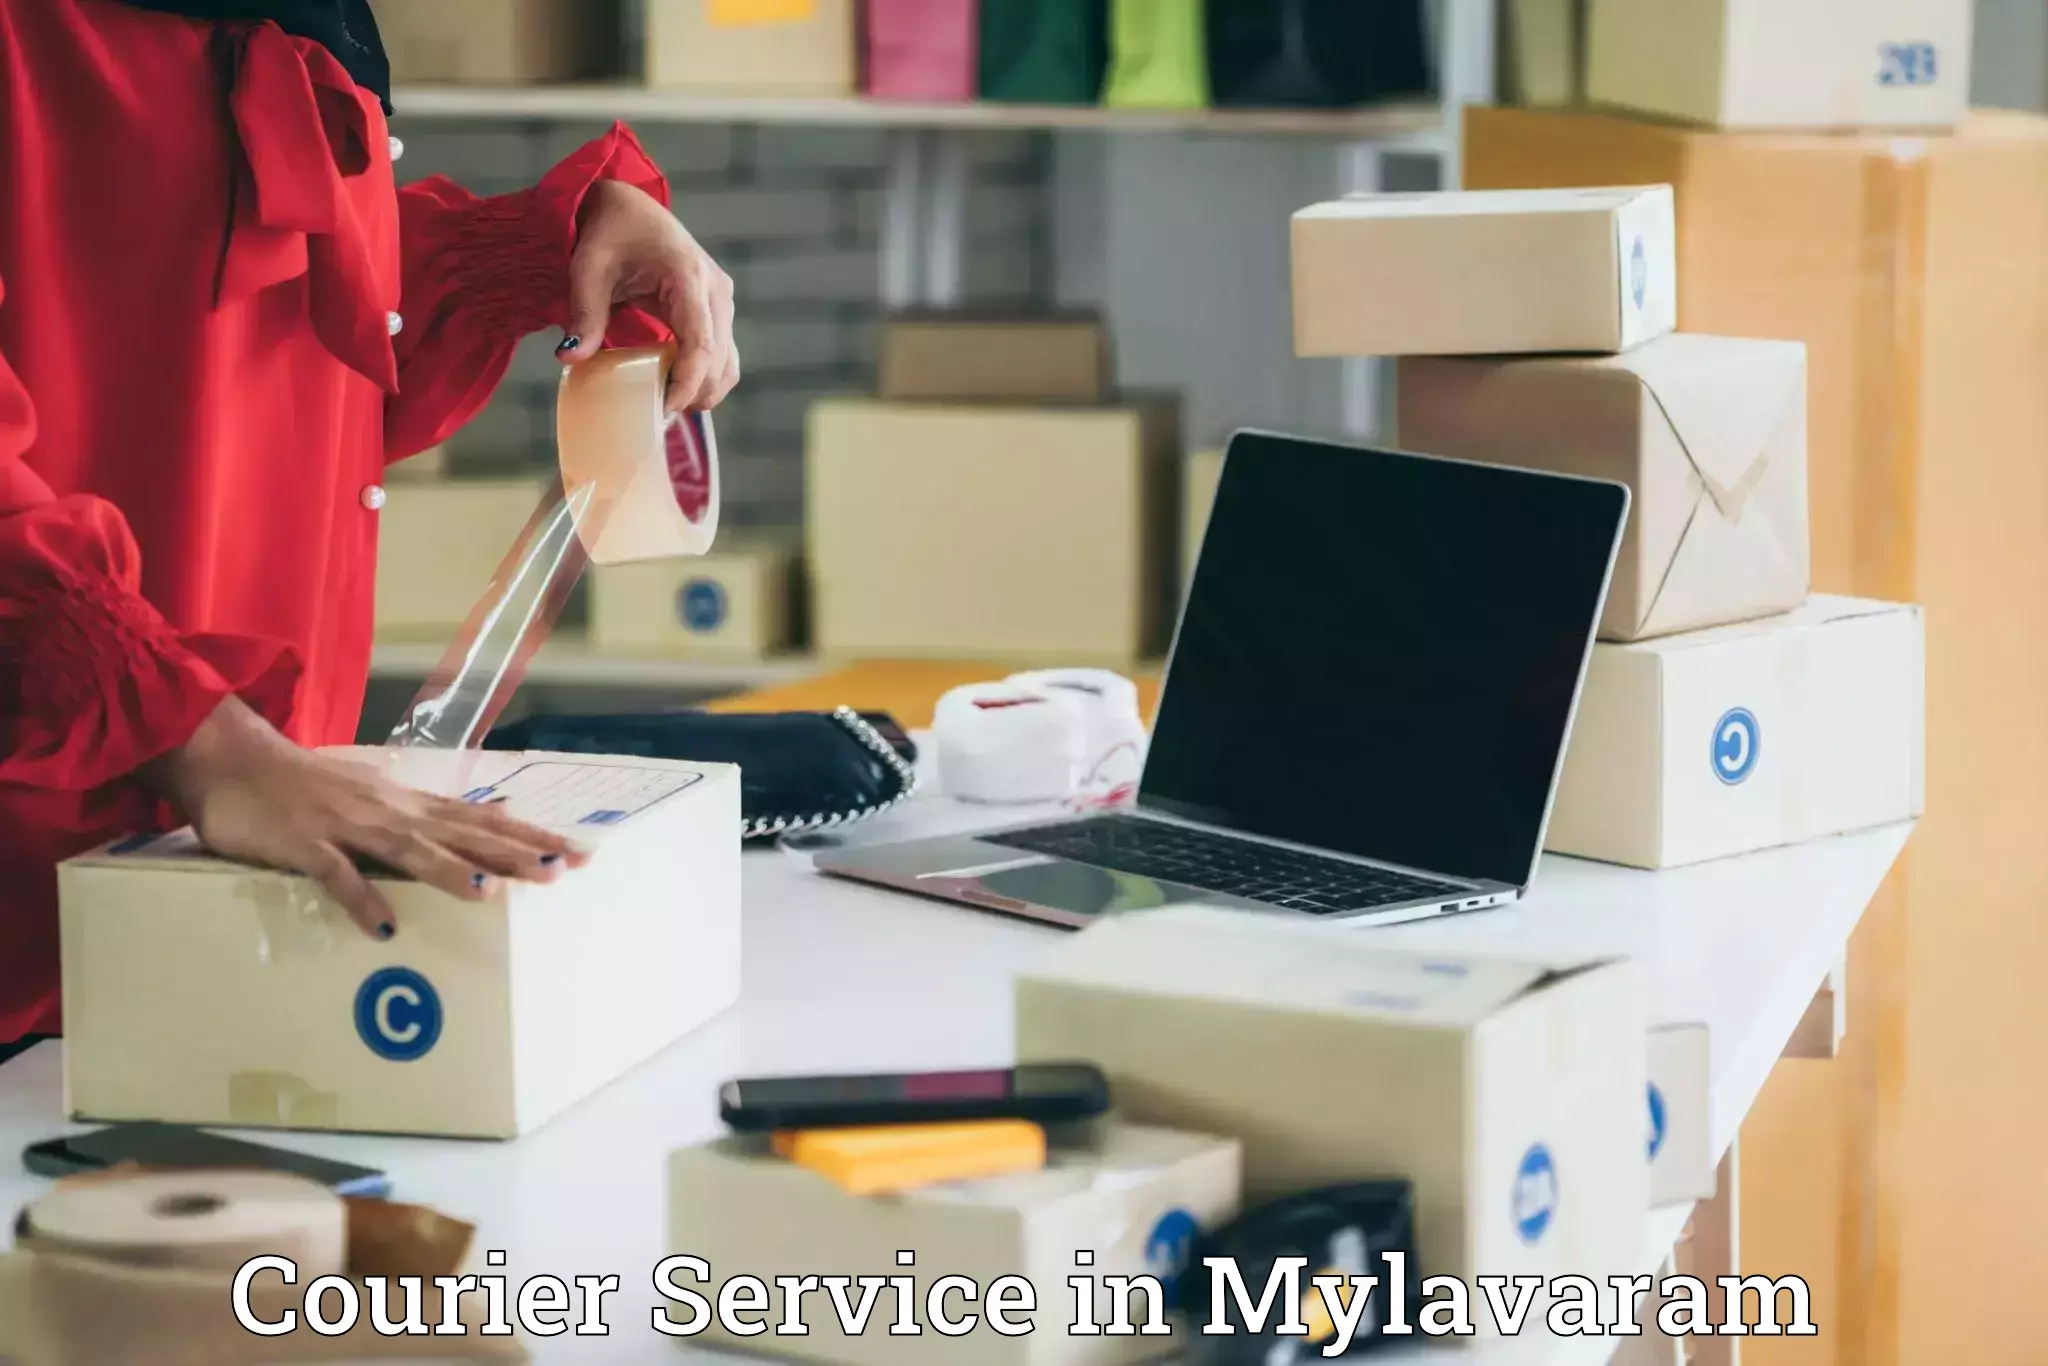 Overnight delivery services in Mylavaram